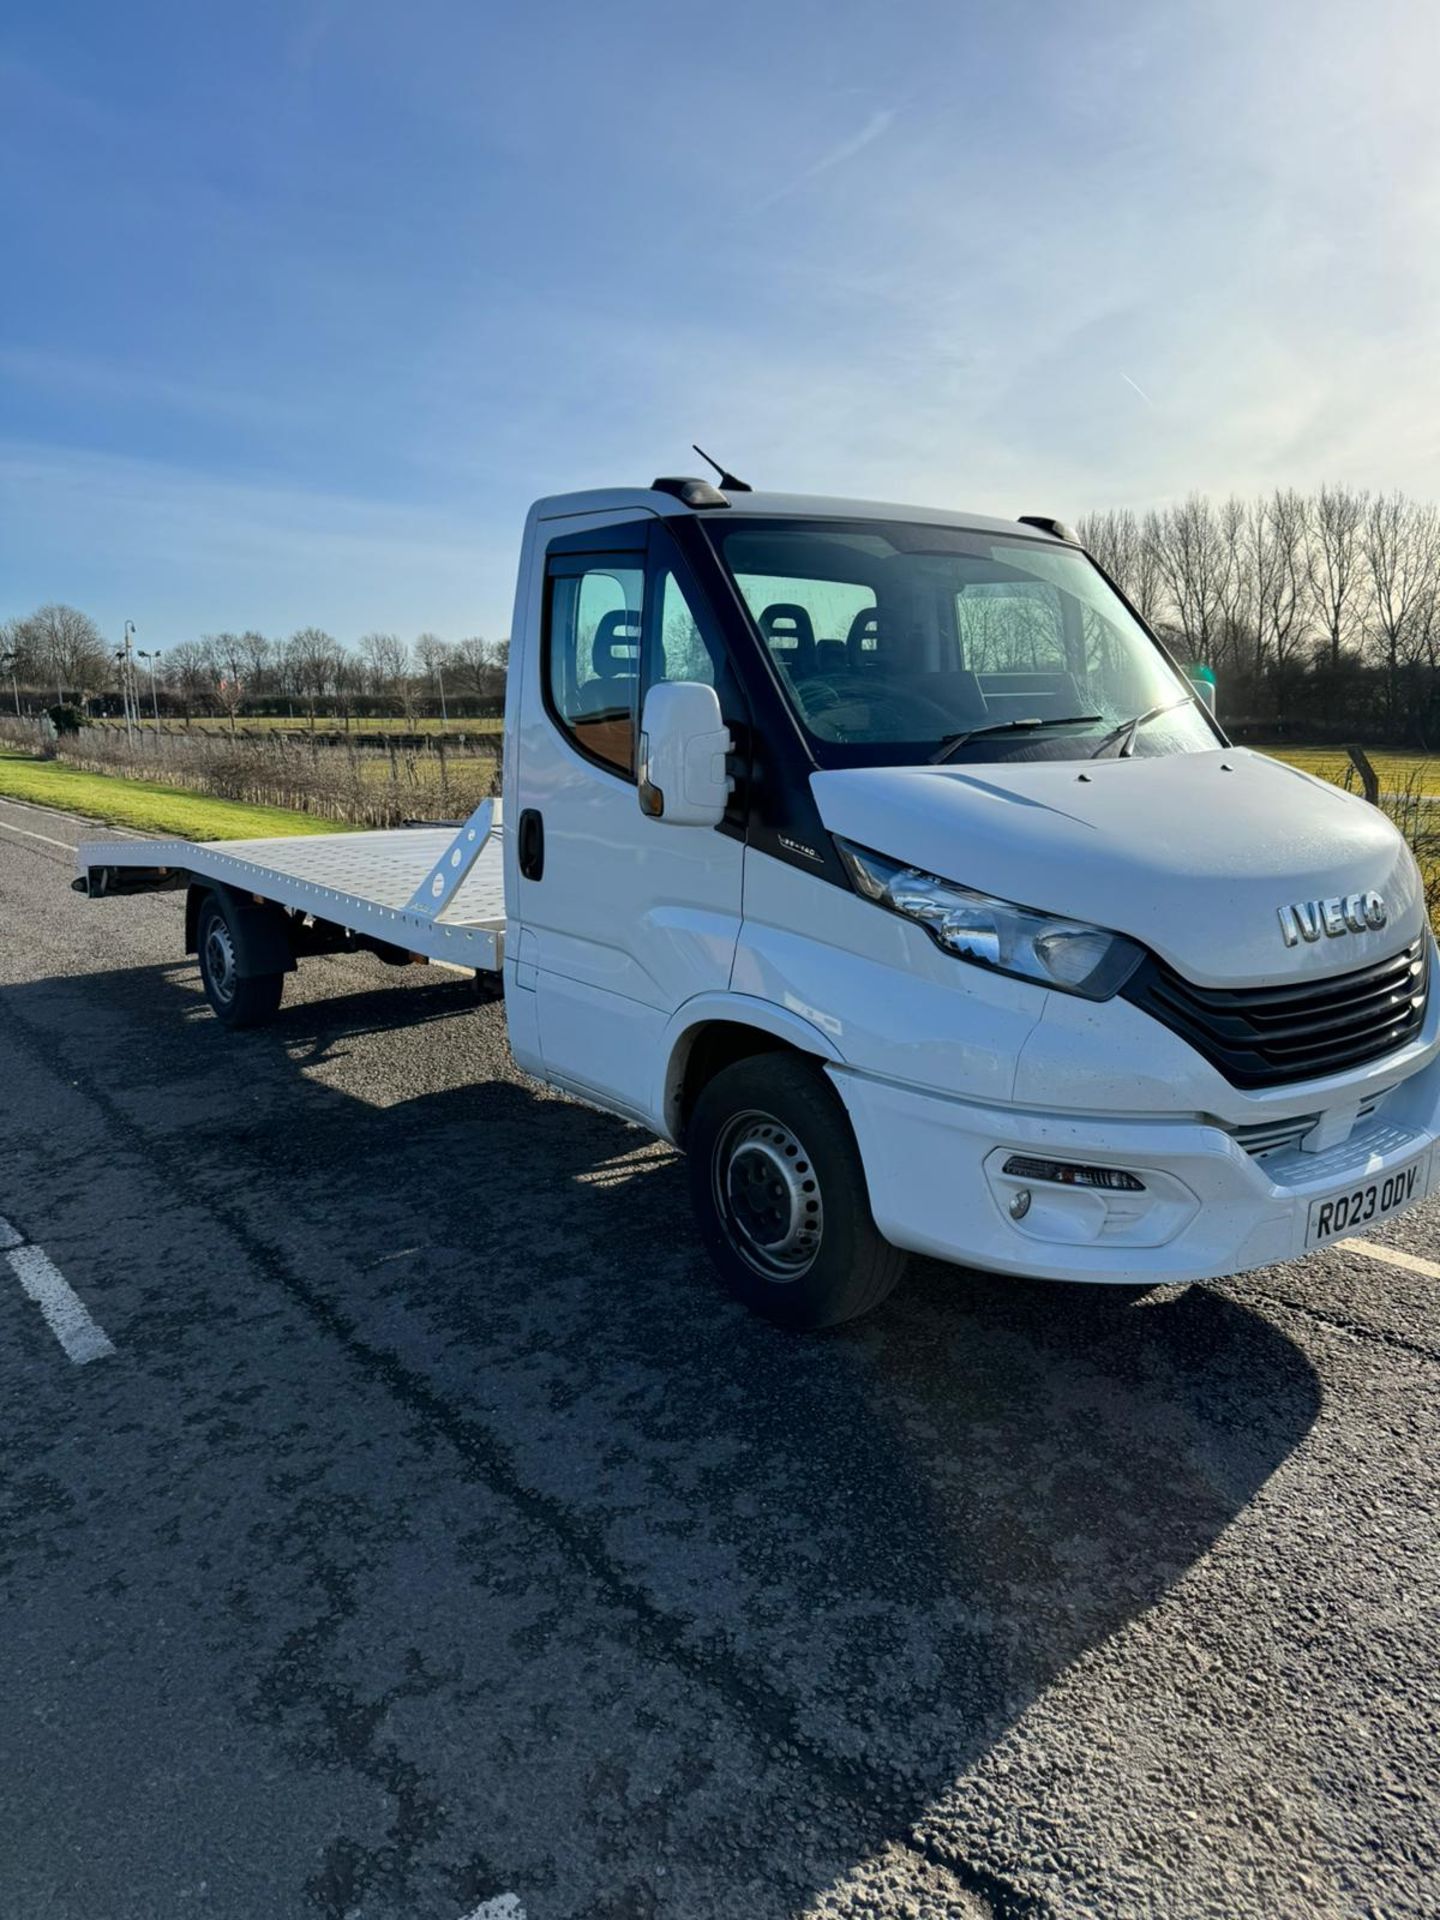 2023 23 IVECO DAILY RECOVERY TRUCK - 12K MILES - NEW ALIUMIUN BODY JUST FITTED - WINCH